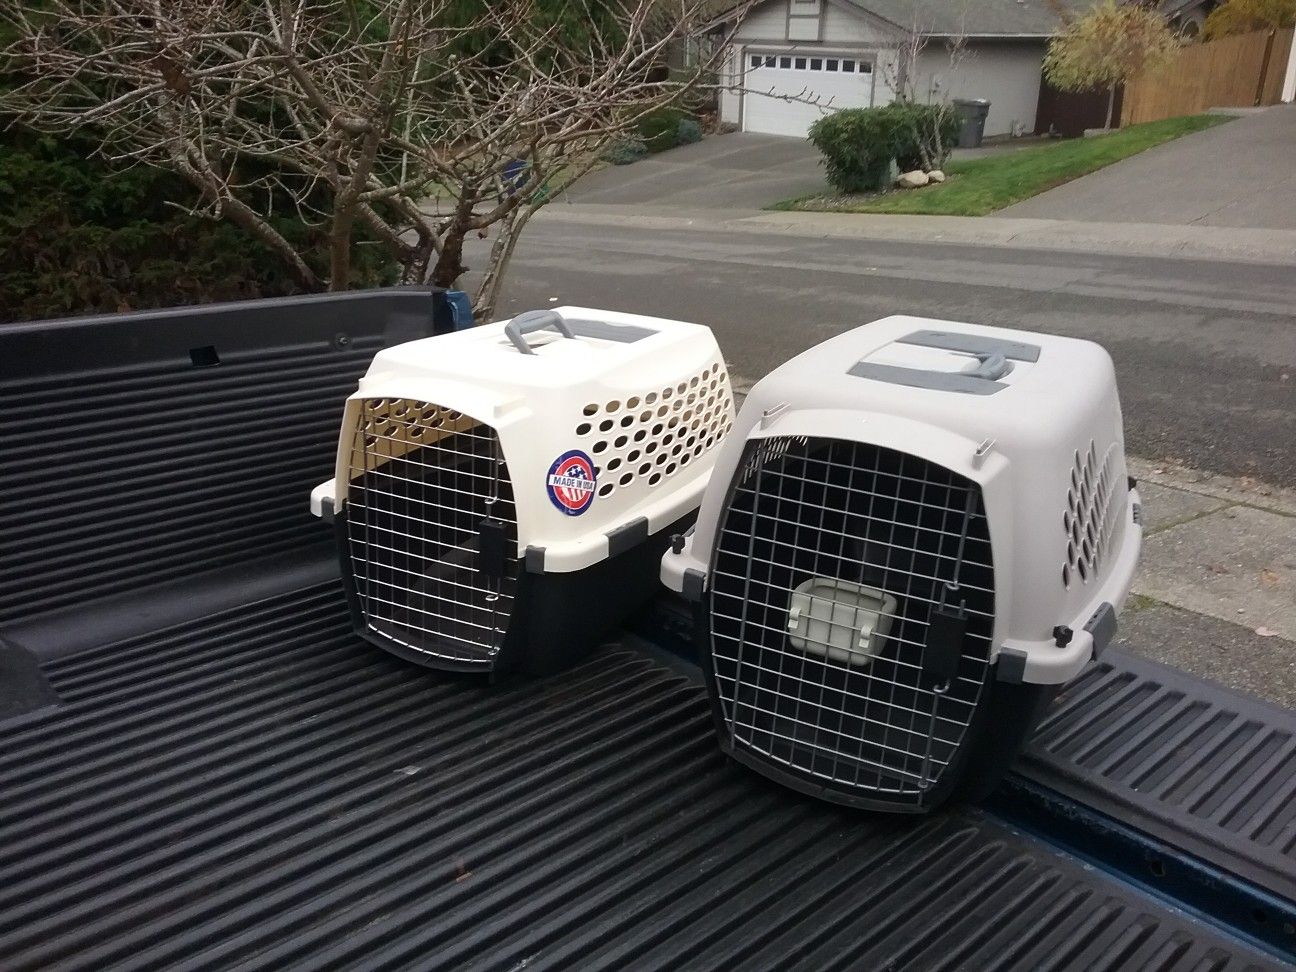 Small Dog Cat Kennel Crate Carrier Like New 24" L by 14" W by 14" H $25 Each